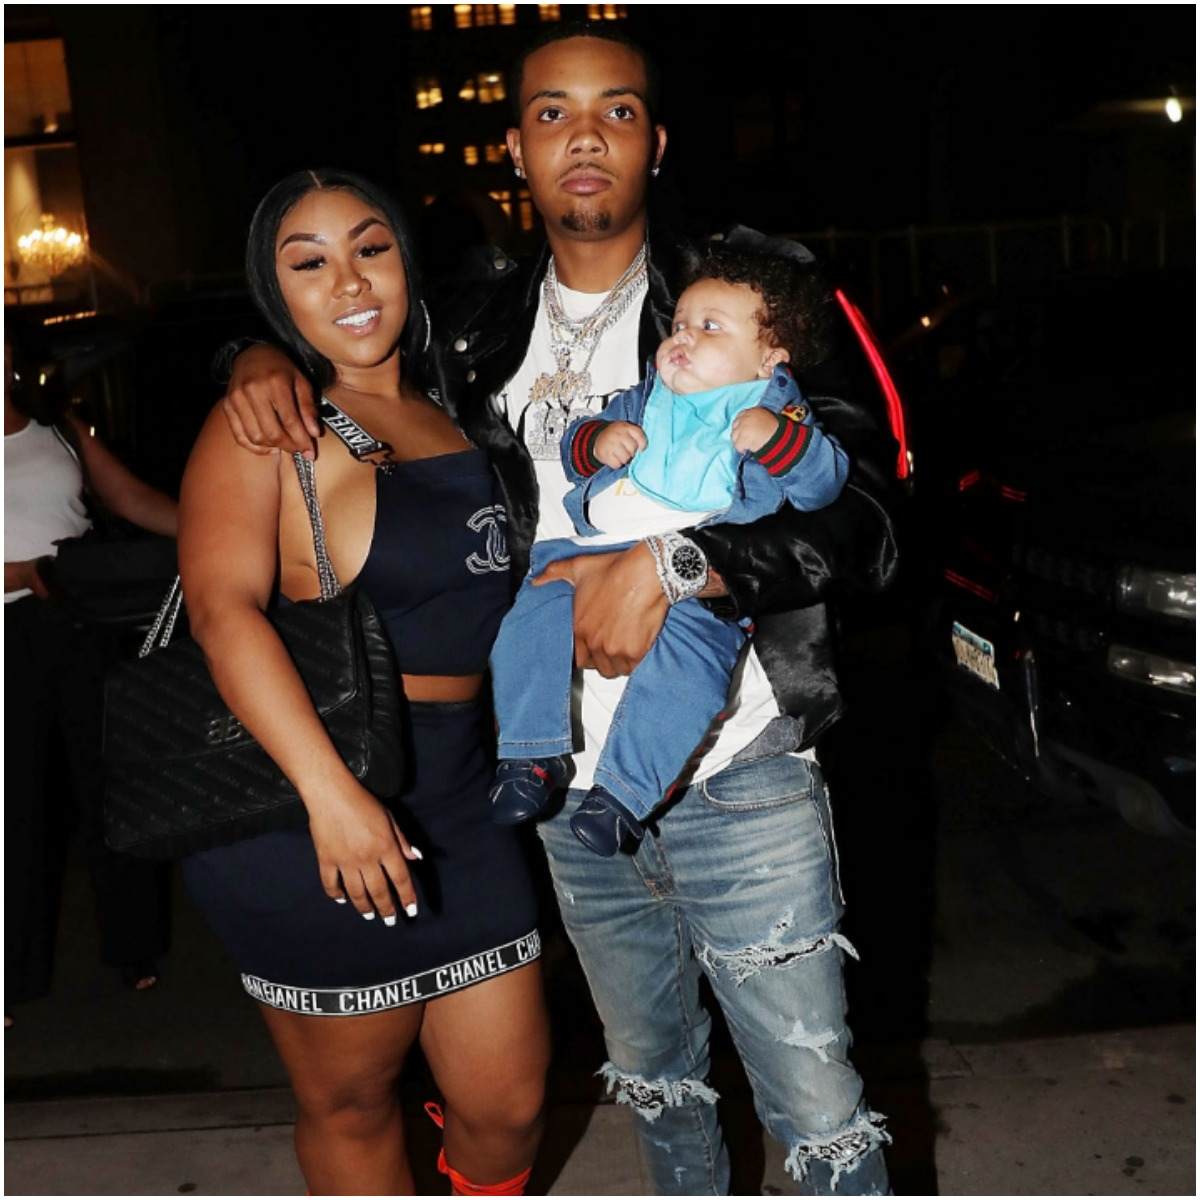 G Herbo Net Worth Fiancée + Wheres G Herbo from? Famous People Today